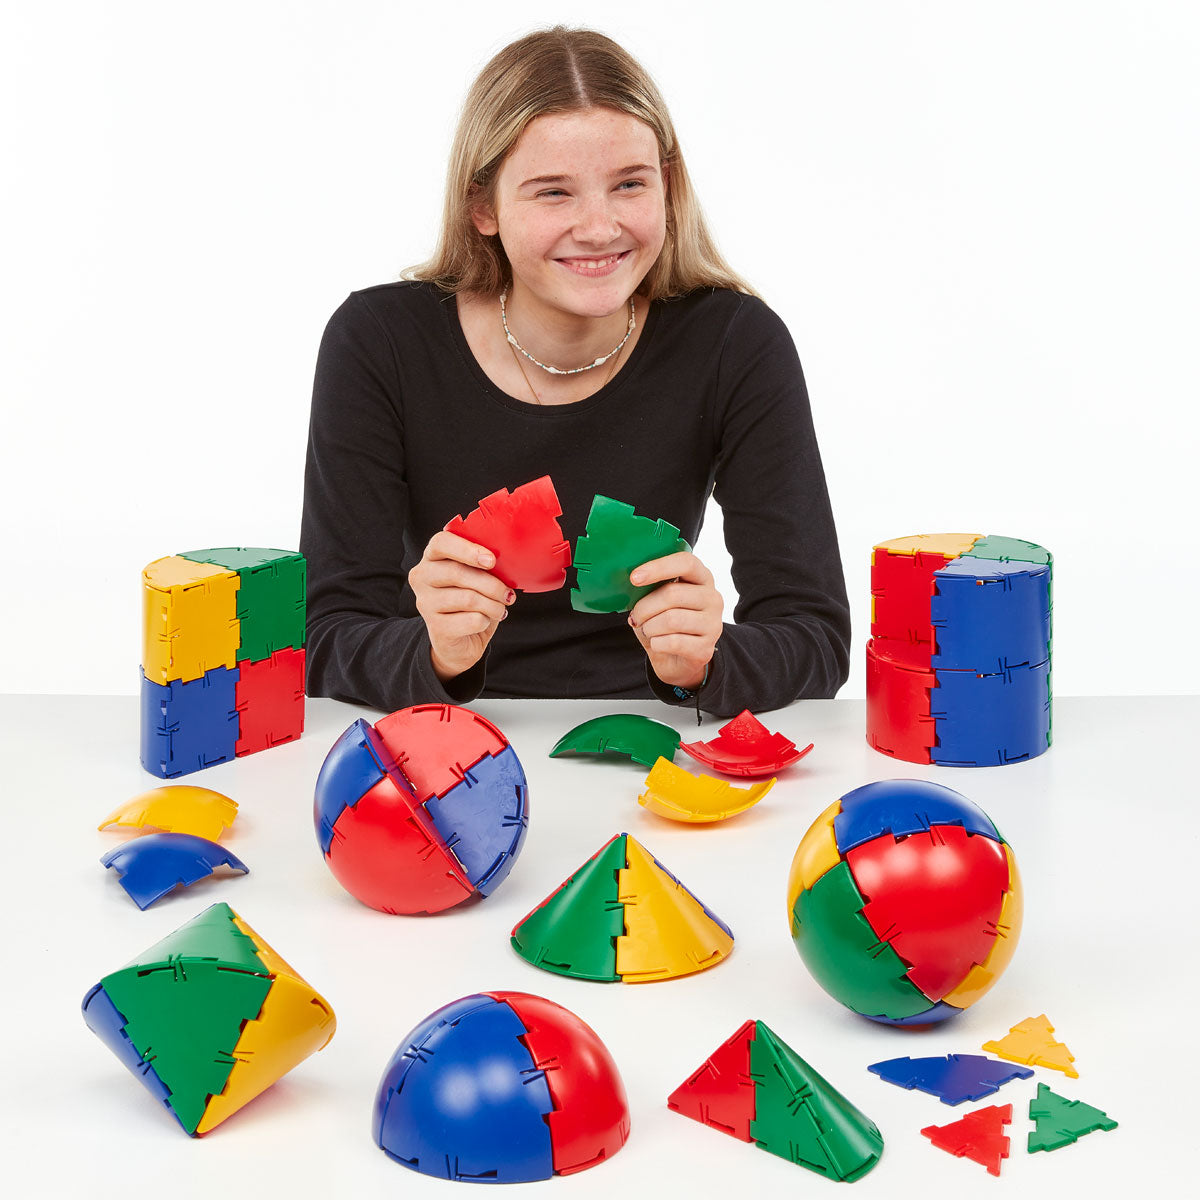 Polydron Sphera Class Set, Introduce your classroom to the fascinating world of spherical models with the Polydron Sphera Class Set. This comprehensive set is designed to engage and inspire students as they build and explore over 16 different spherical models together.Containing a total of 196 pieces, this class set provides ample resources for large groups of children to work collaboratively. The set includes 36 sphere pieces, 72 quadrant pieces, 16 cone pieces, 12 cylinder pieces, 20 squares, and 40 right